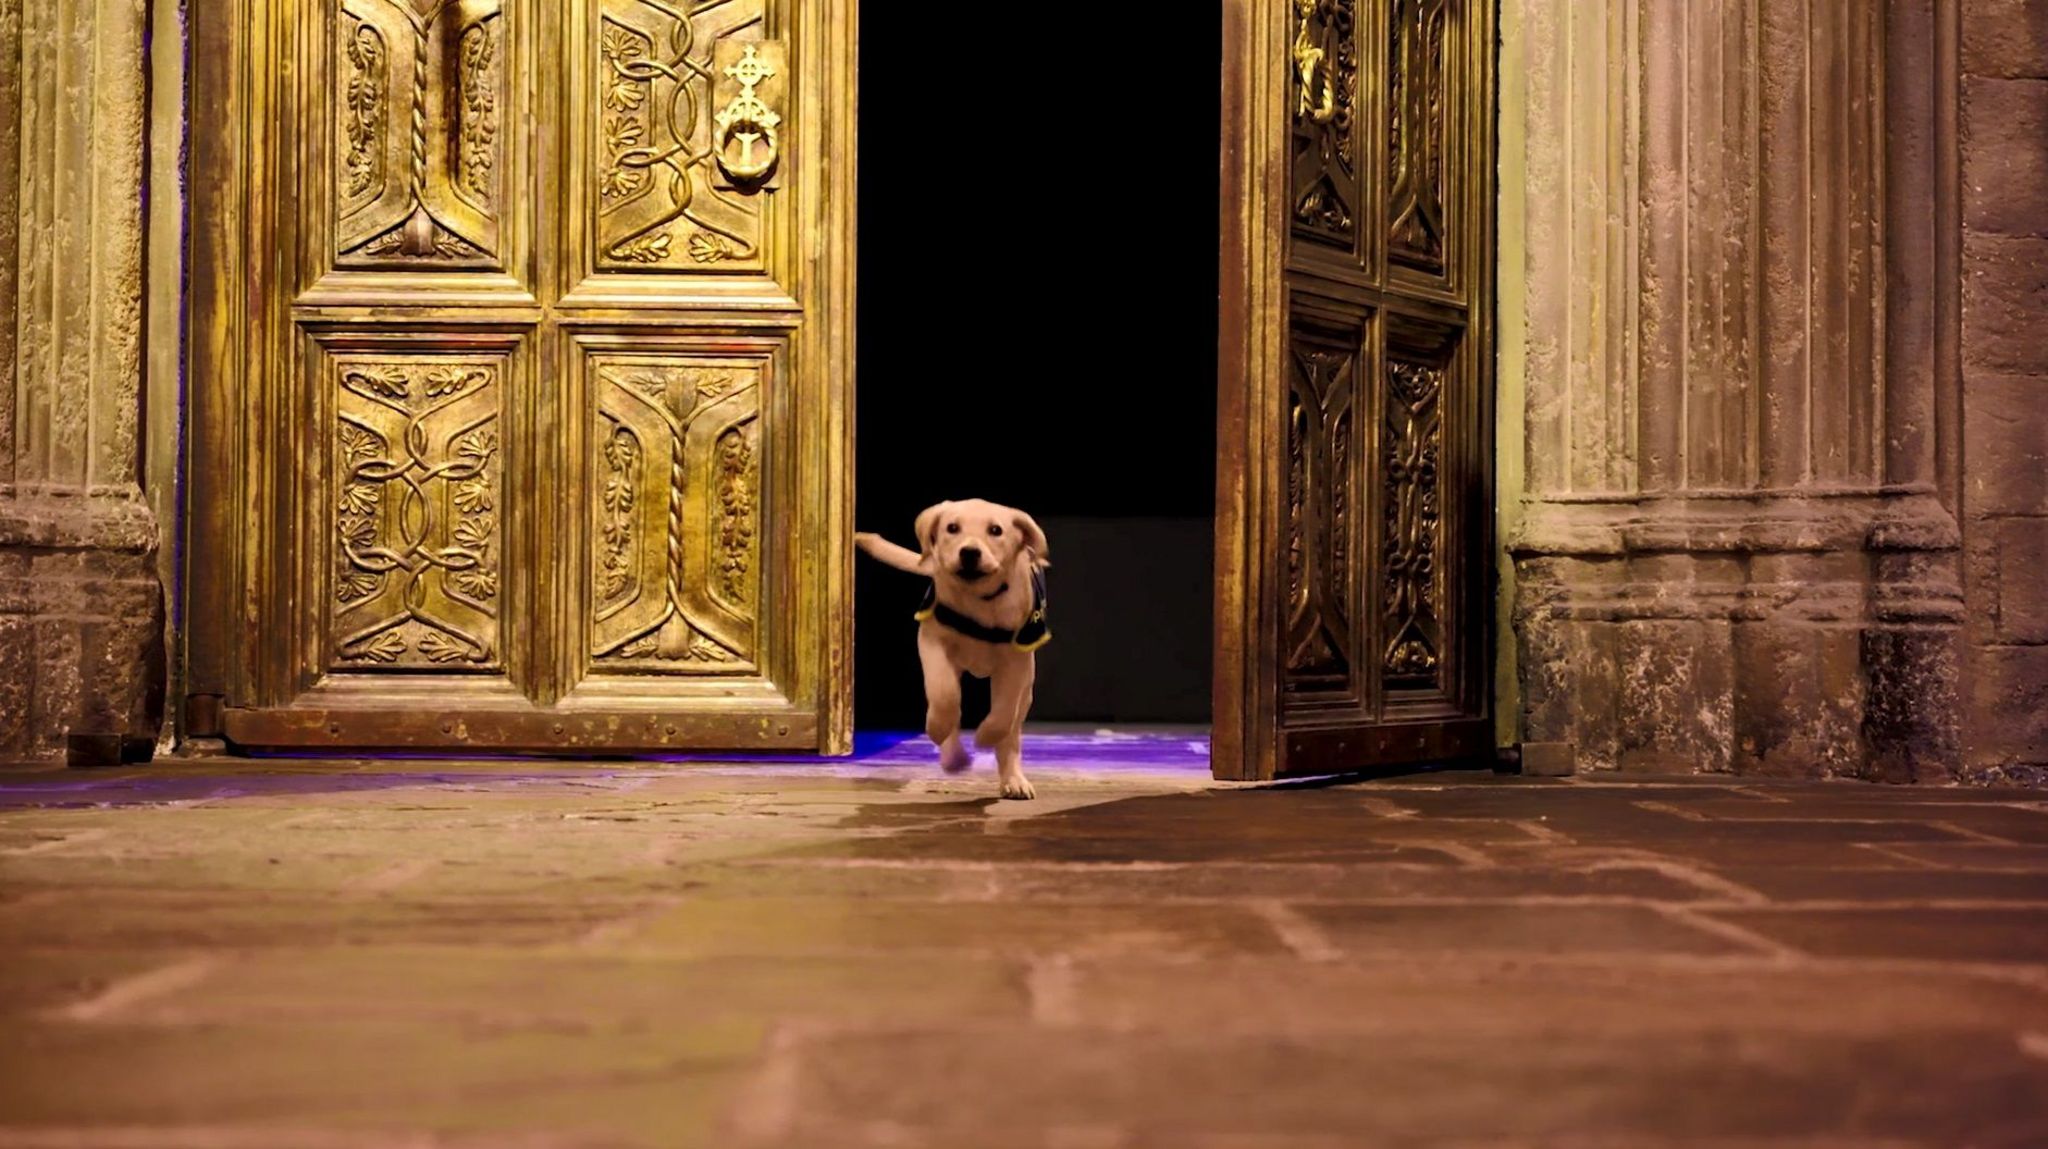 Labrador guide dog runs into the set for the Great Hall in Harry Potter